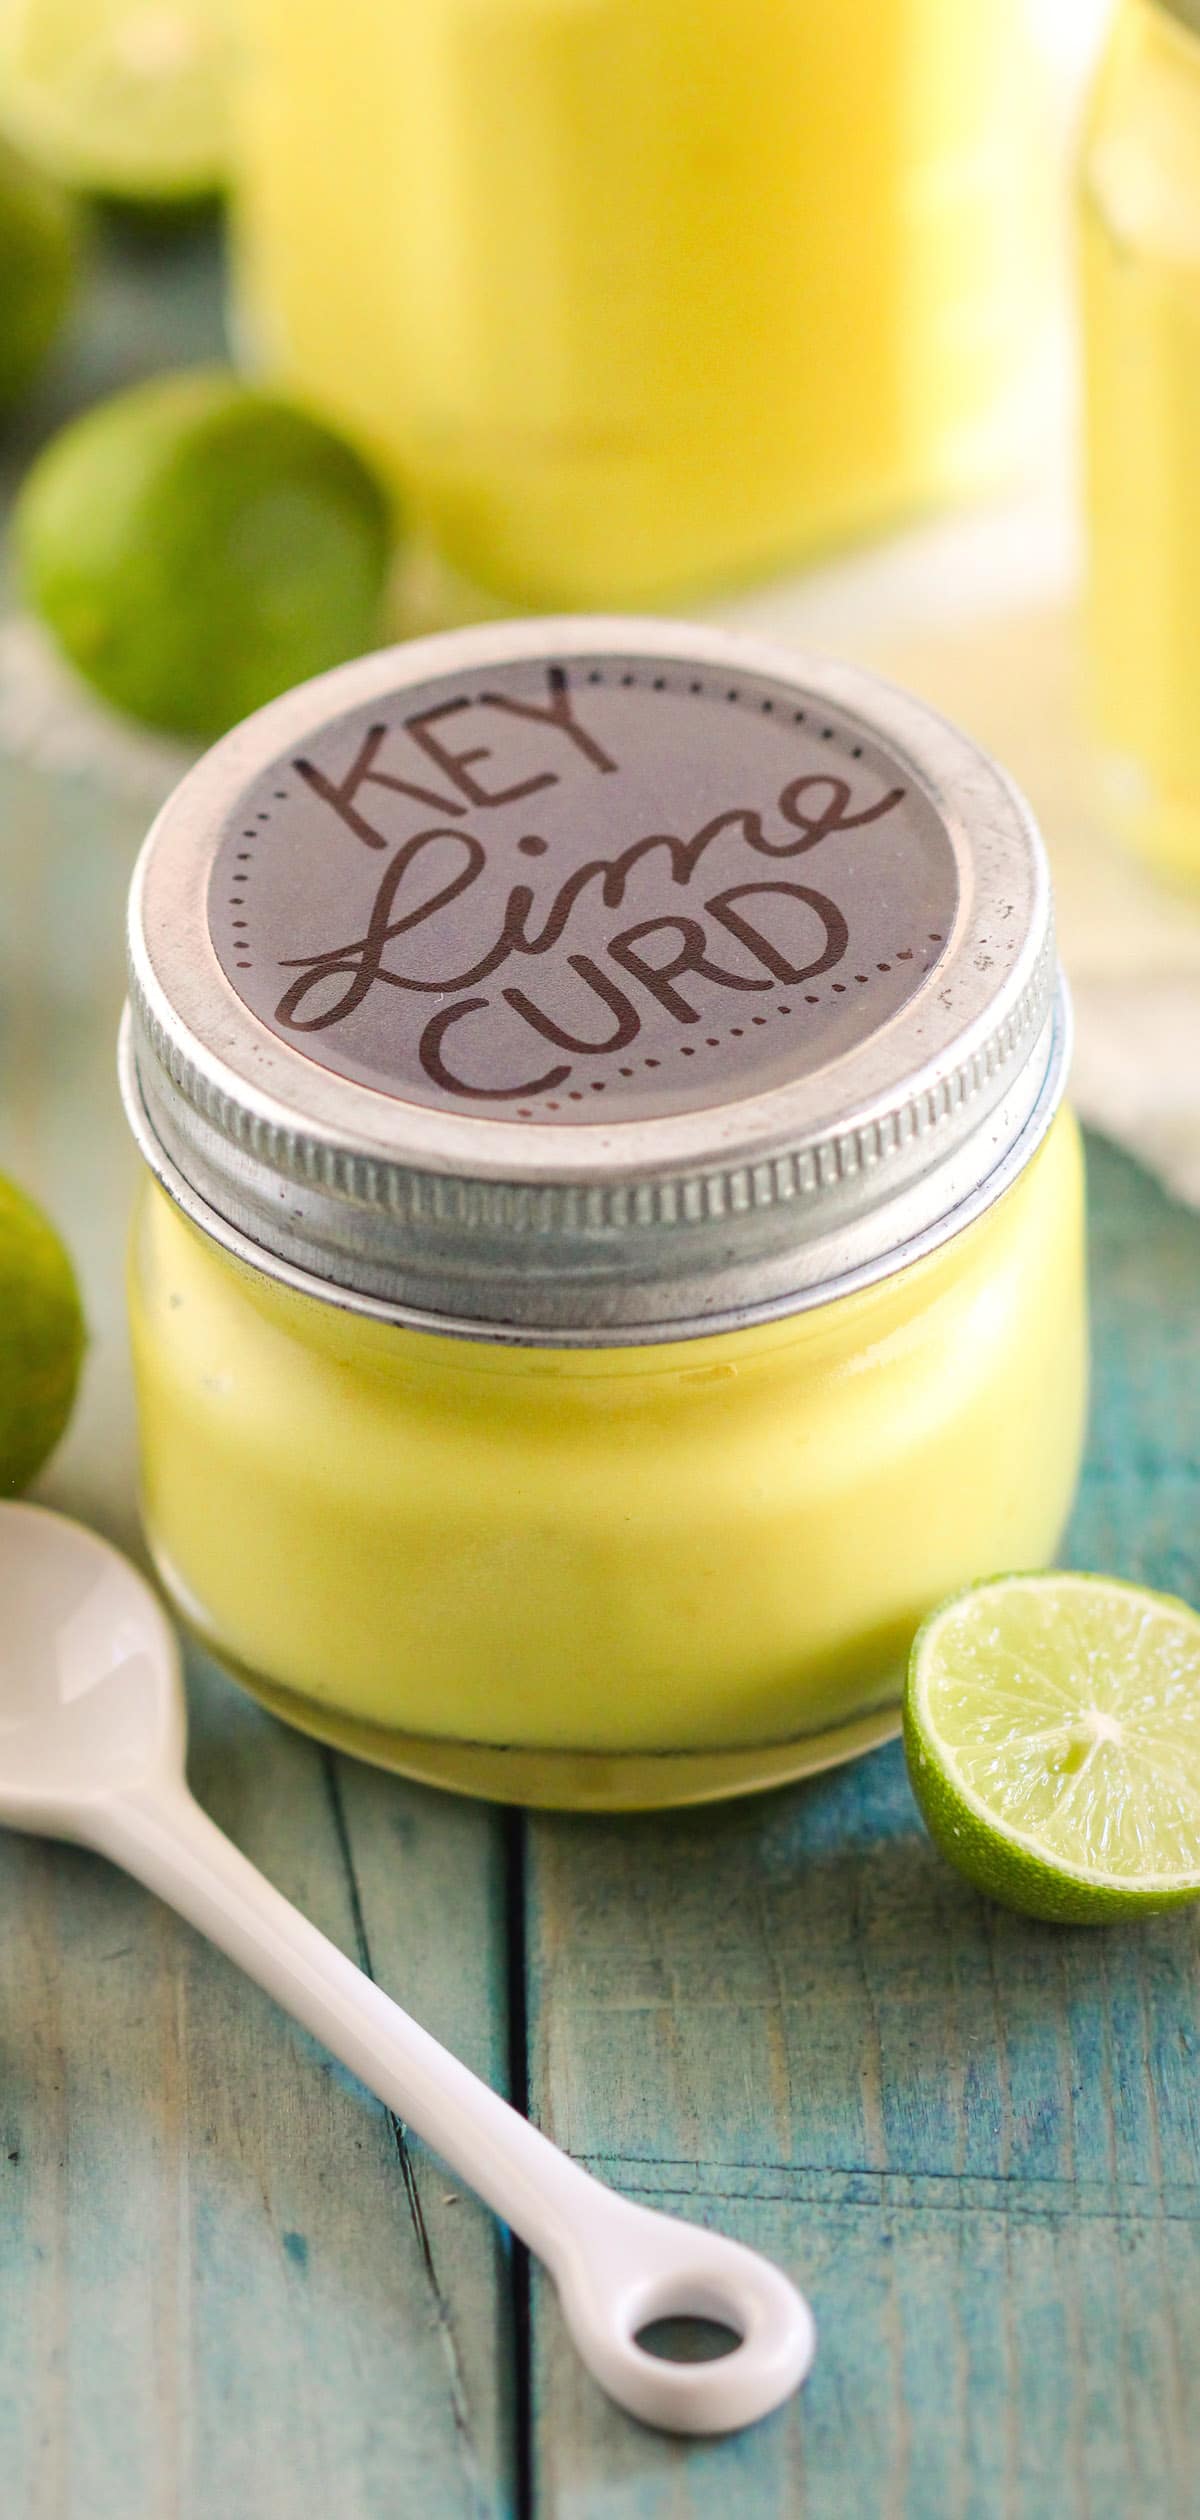 (How to Make Key Lime Curd) This Healthy Vegan Key Lime Curd is creamy, sweet, tart, and delicious. You'd never know it's sugar free, low carb, gluten free, dairy free, and vegan! It’s summer in a spoonful. Healthy Dessert Recipes with sugar free, low calorie, low fat, low carb, high protein, gluten free, dairy free, vegan, and raw options at the Desserts With Benefits Blog (www.DessertsWithBenefits.com)